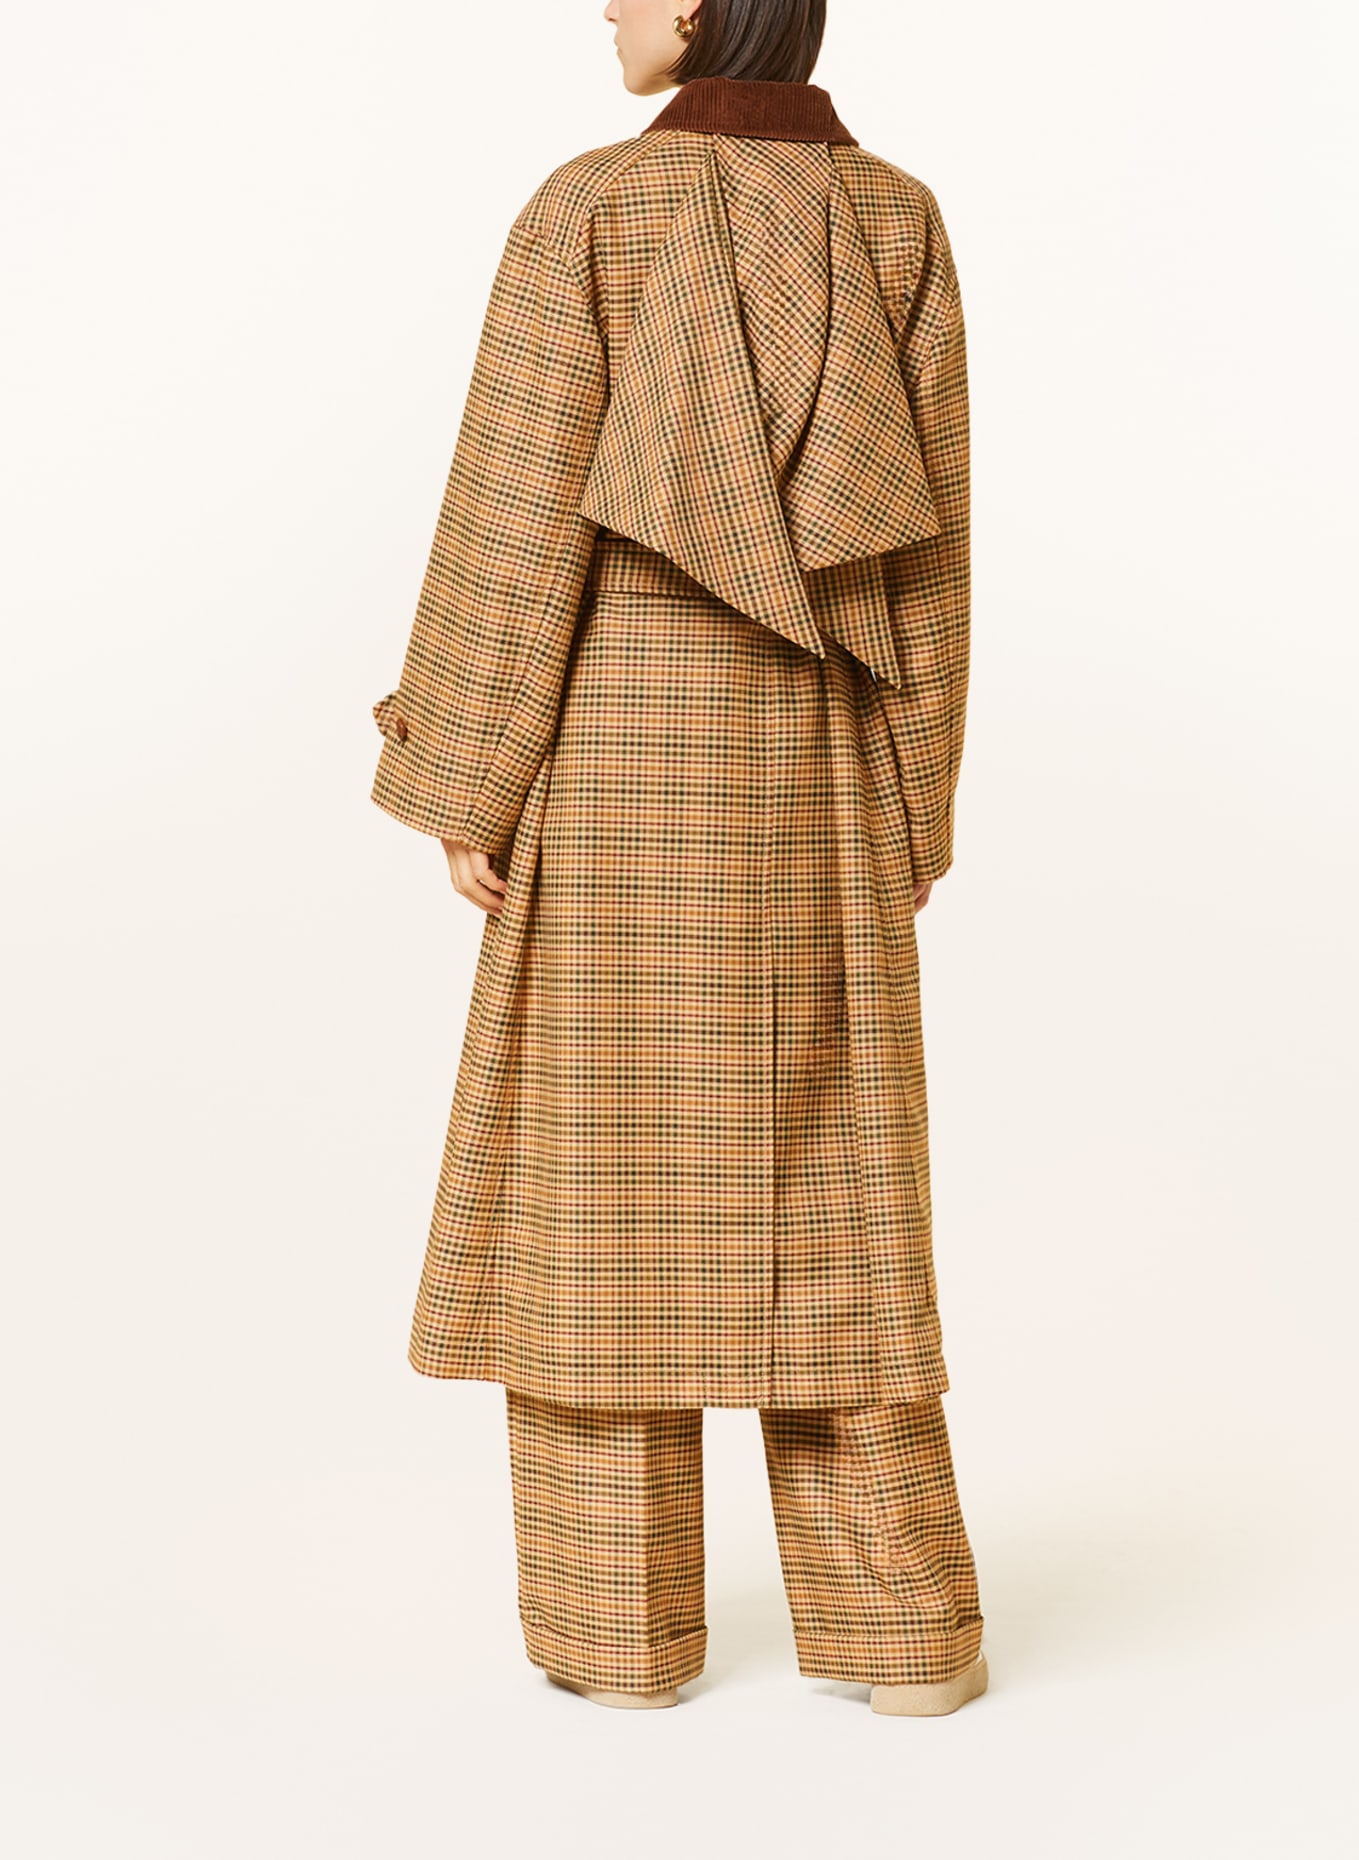 KENZO Trench coat with detachable hood, Color: BLACK/ BEIGE/ OLIVE (Image 3)